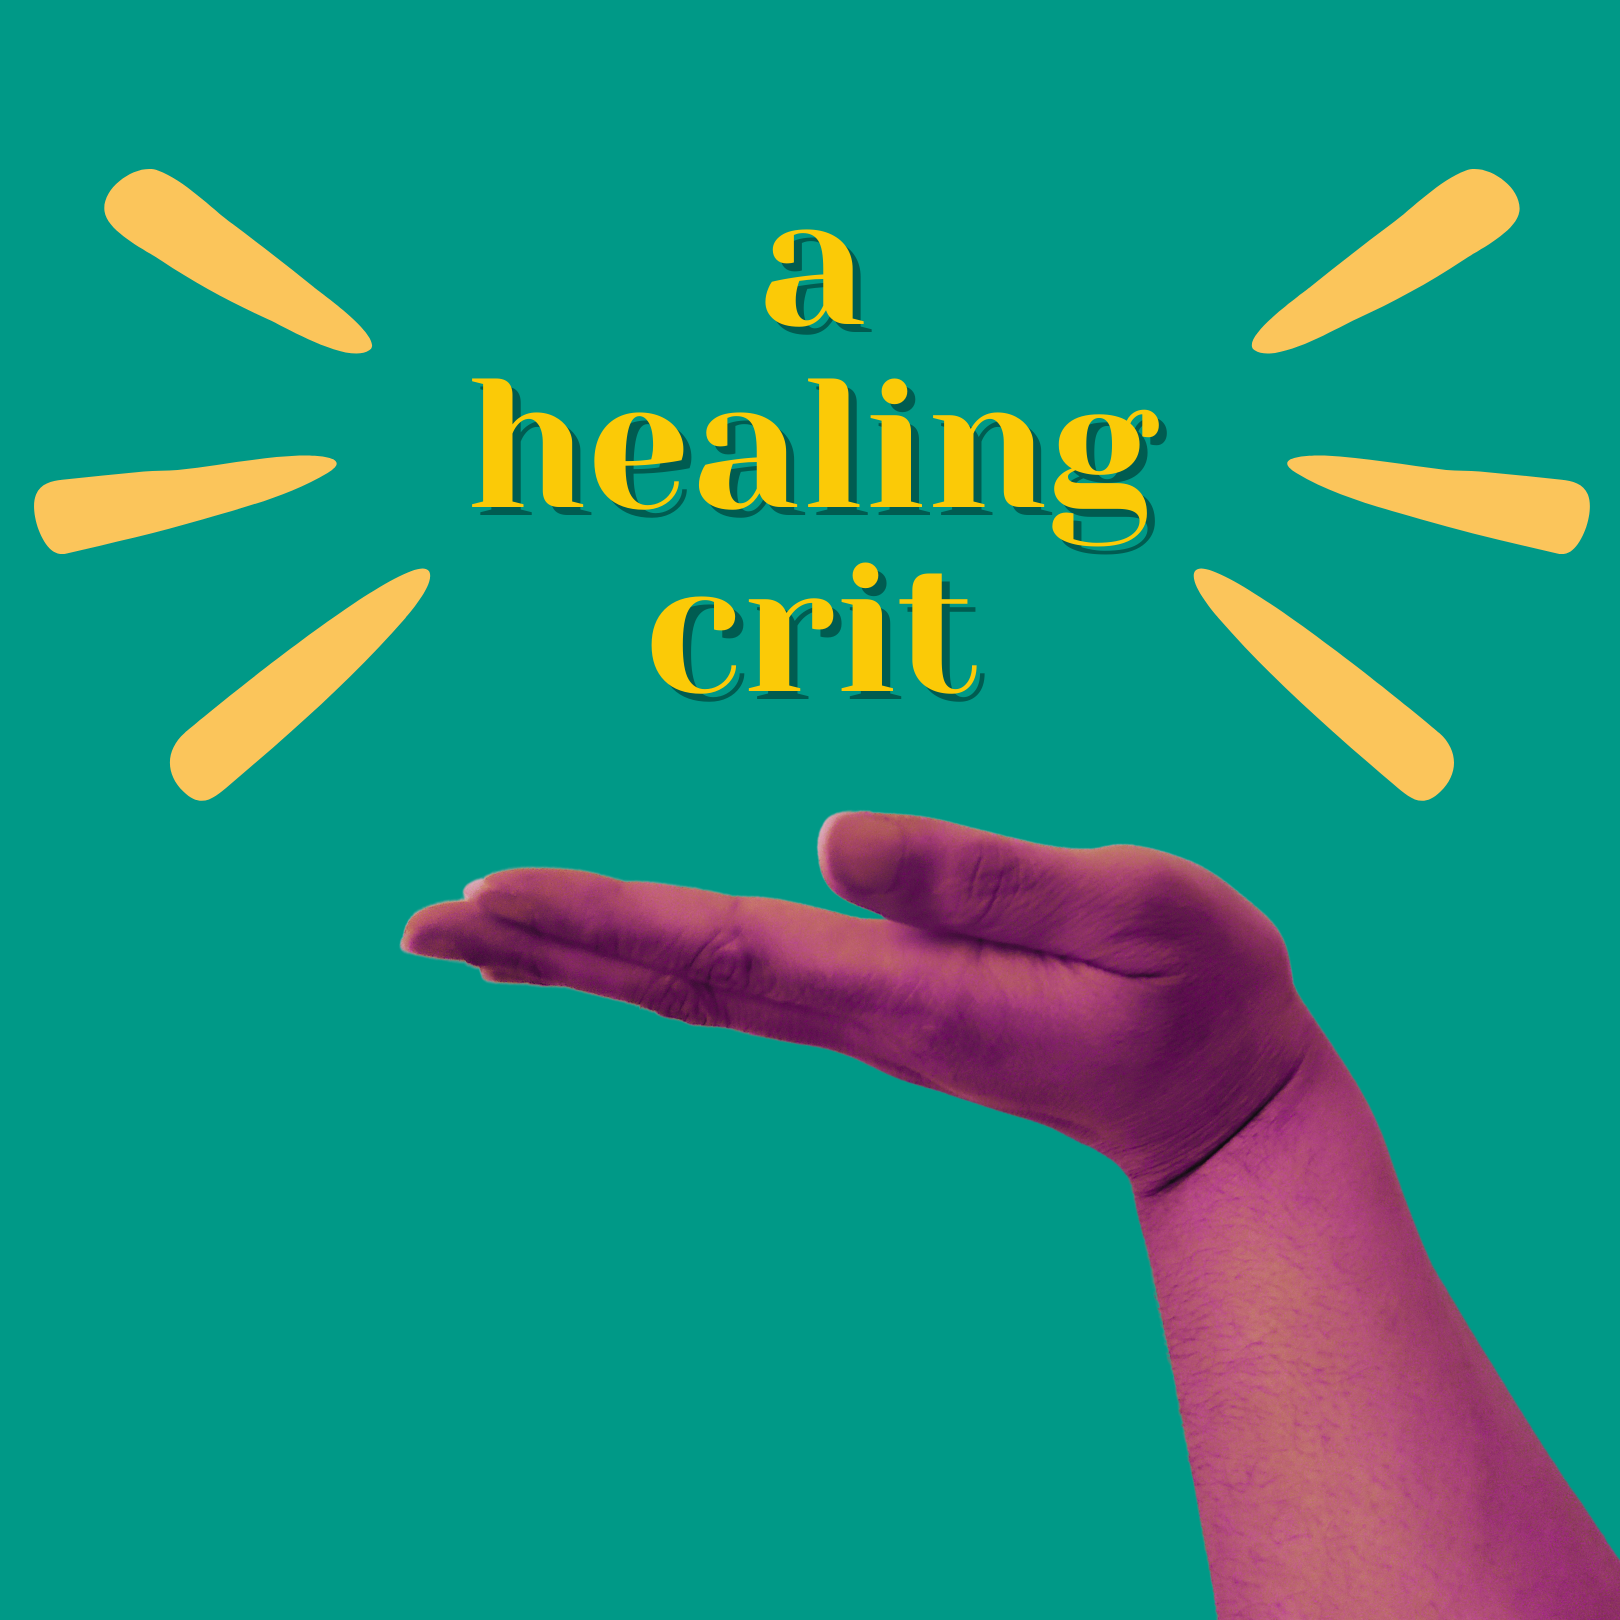 On a green background, a purple hand motions to the text "a healing crit" in yellow serif font, surrounded by yellow exclamation lines.